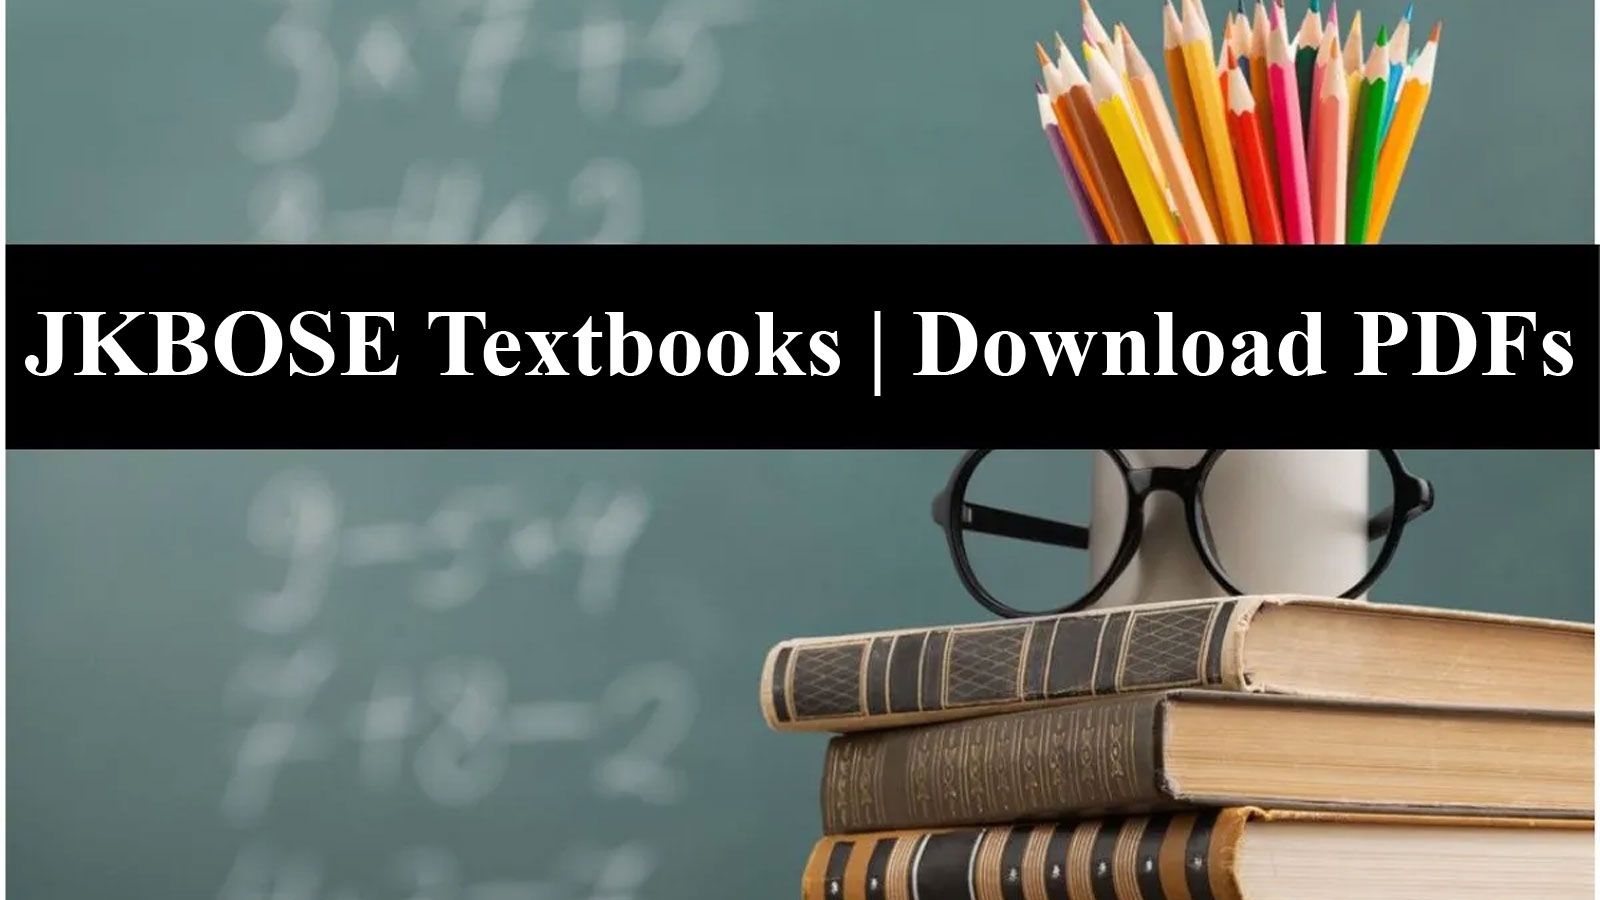 JKBOSE Class 7th Textbooks; Direct Link to Download PDFs